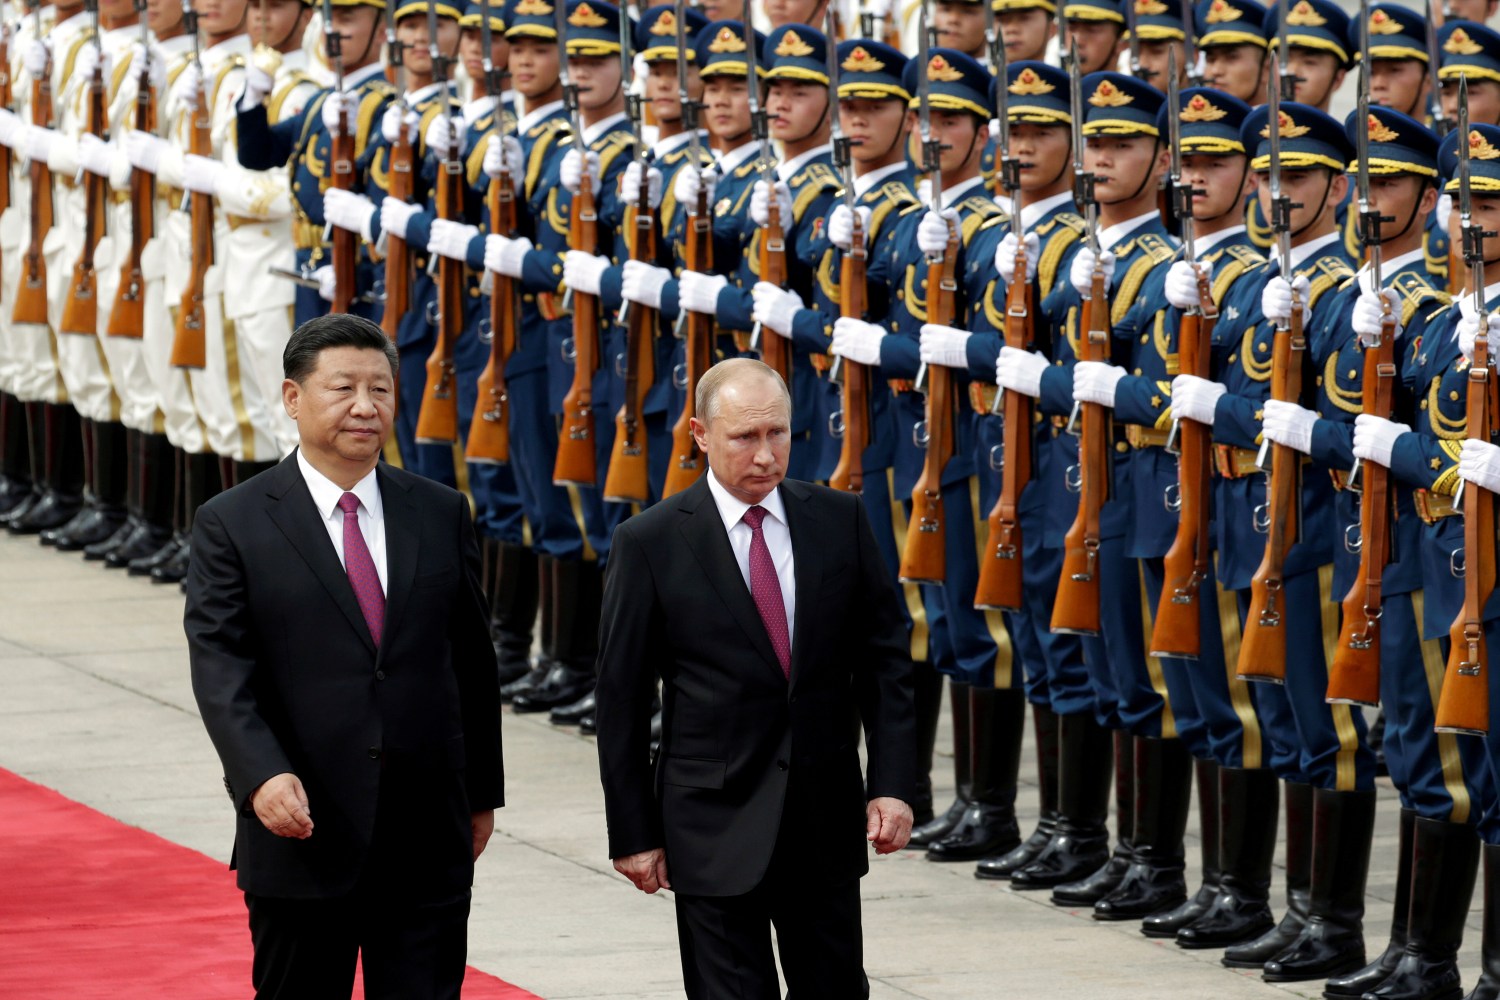 Chinese President Xi Jinping and Russian President Vladimir Putin attend a welcome ceremony outside the Great Hall of the People in Beijing, China June 8, 2018. REUTERS/Jason Lee     TPX IMAGES OF THE DAY - RC1AA9284B20